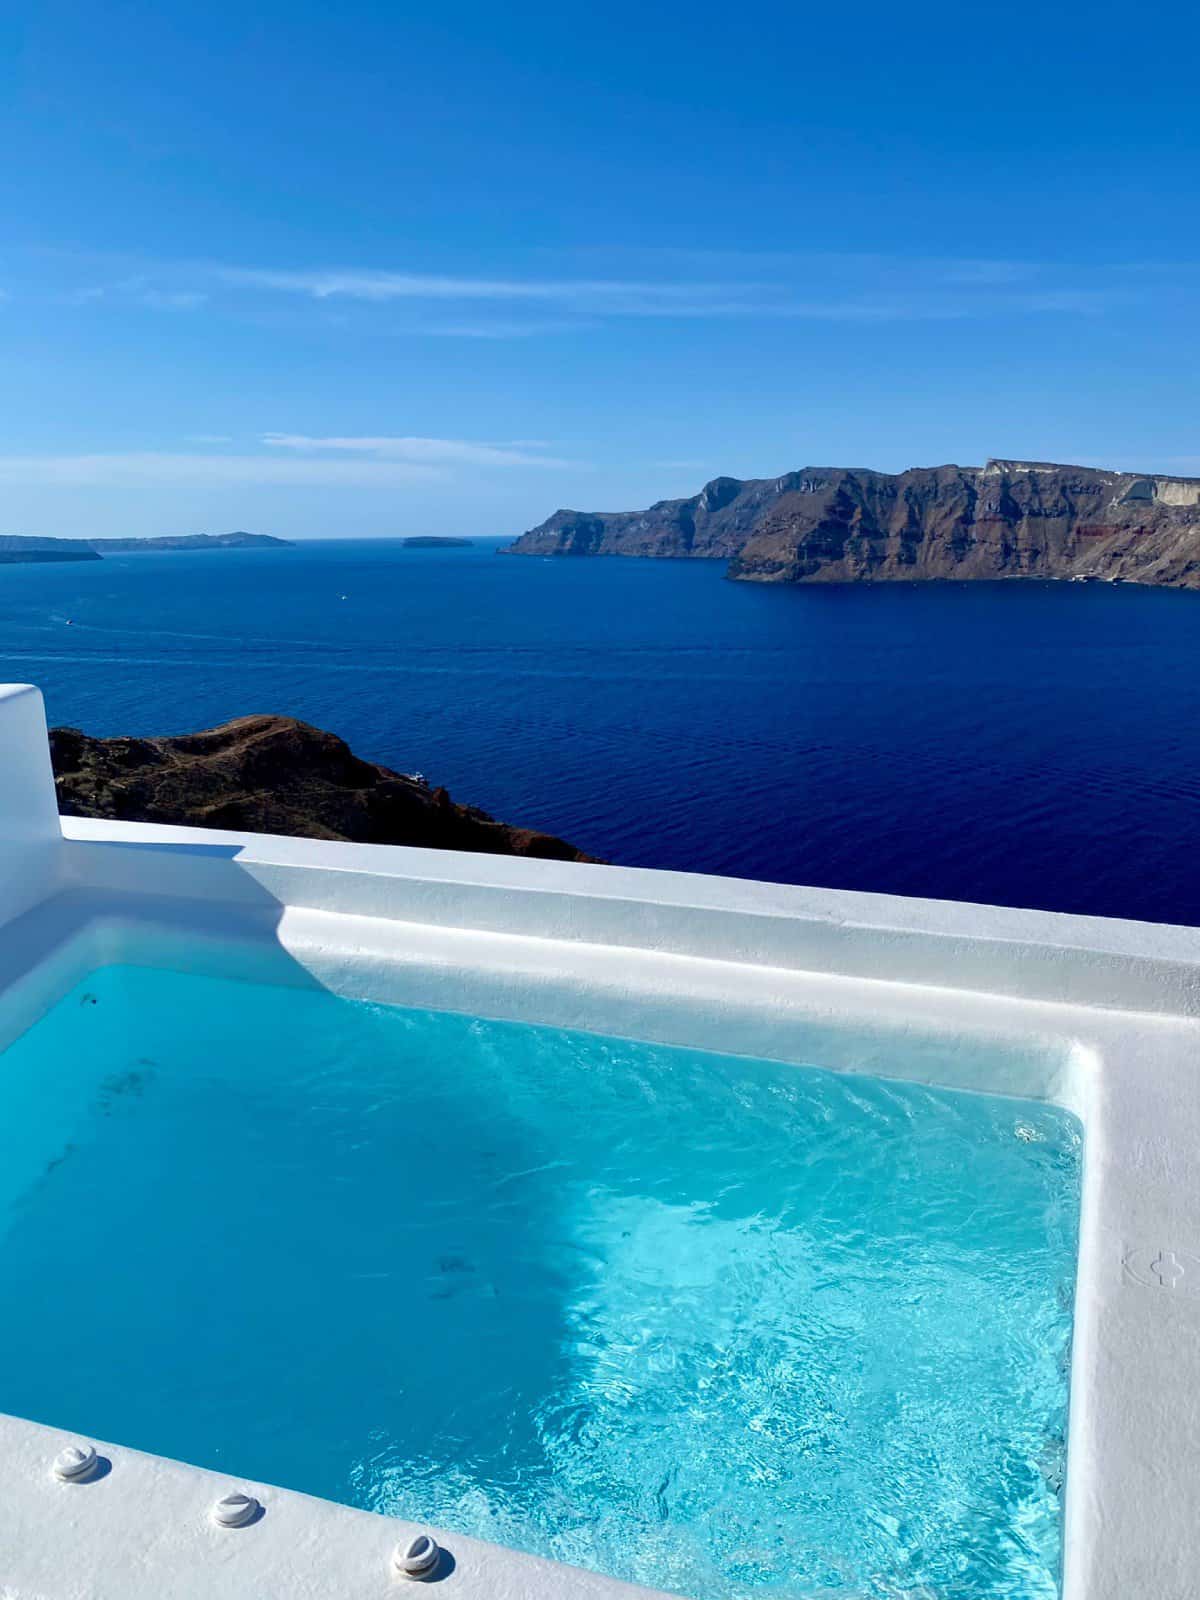 Things to do in Oia, Santorini | Is Oia worth visiting? A guide to Santorini's most famous town...what to do in Oia, where to eat, the best Oia cave hotels, helpful tips, & I share the awesome parts & the terrible touristy parts so you can decide if Oia deserves a spot on your Greek islands itinerary. 